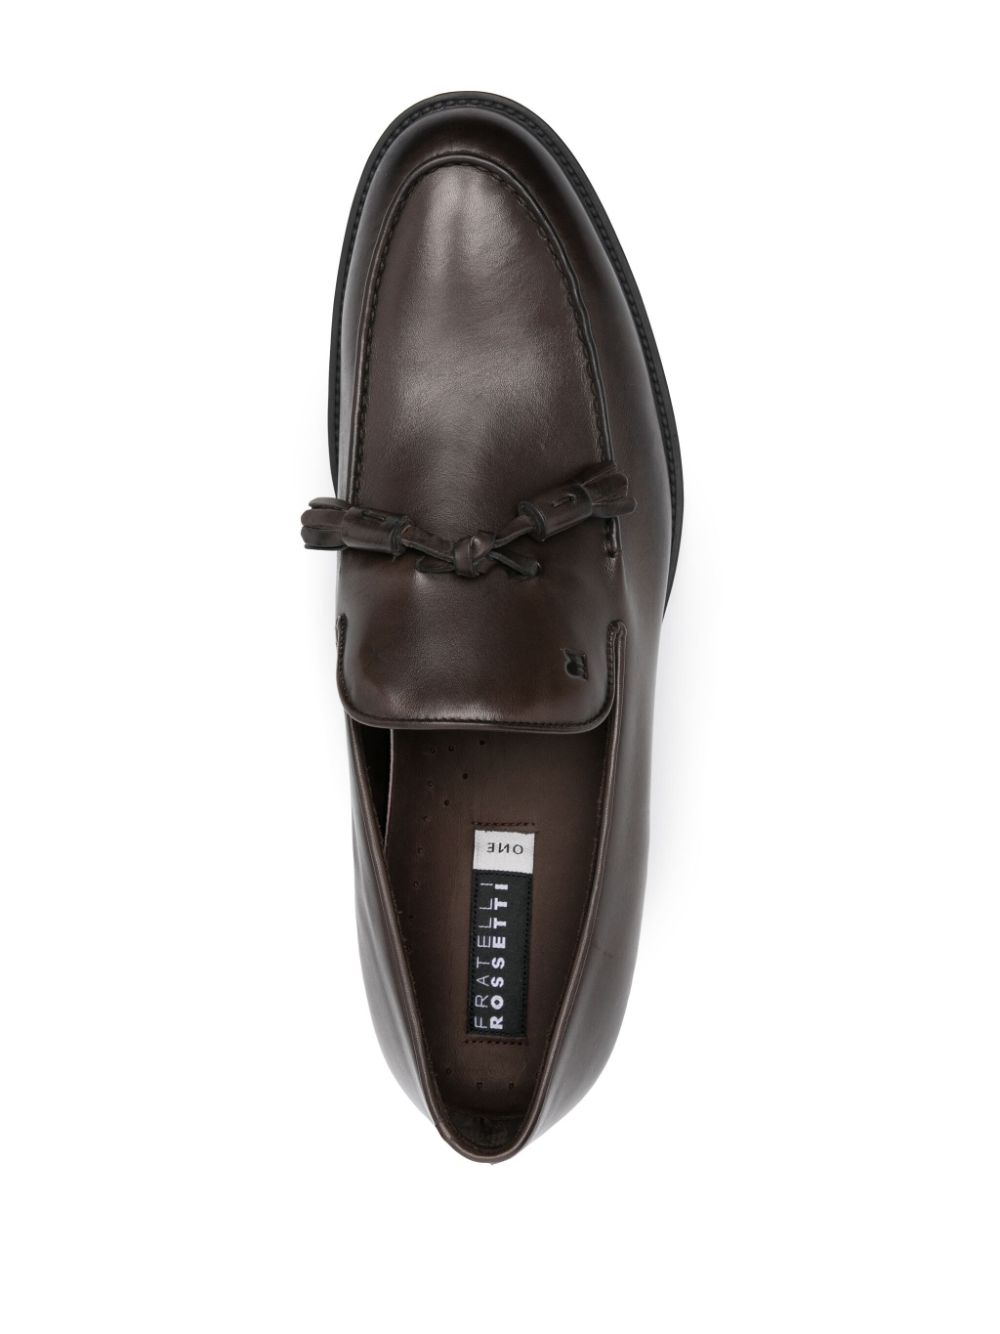 Ebony leather moccasin with tassels